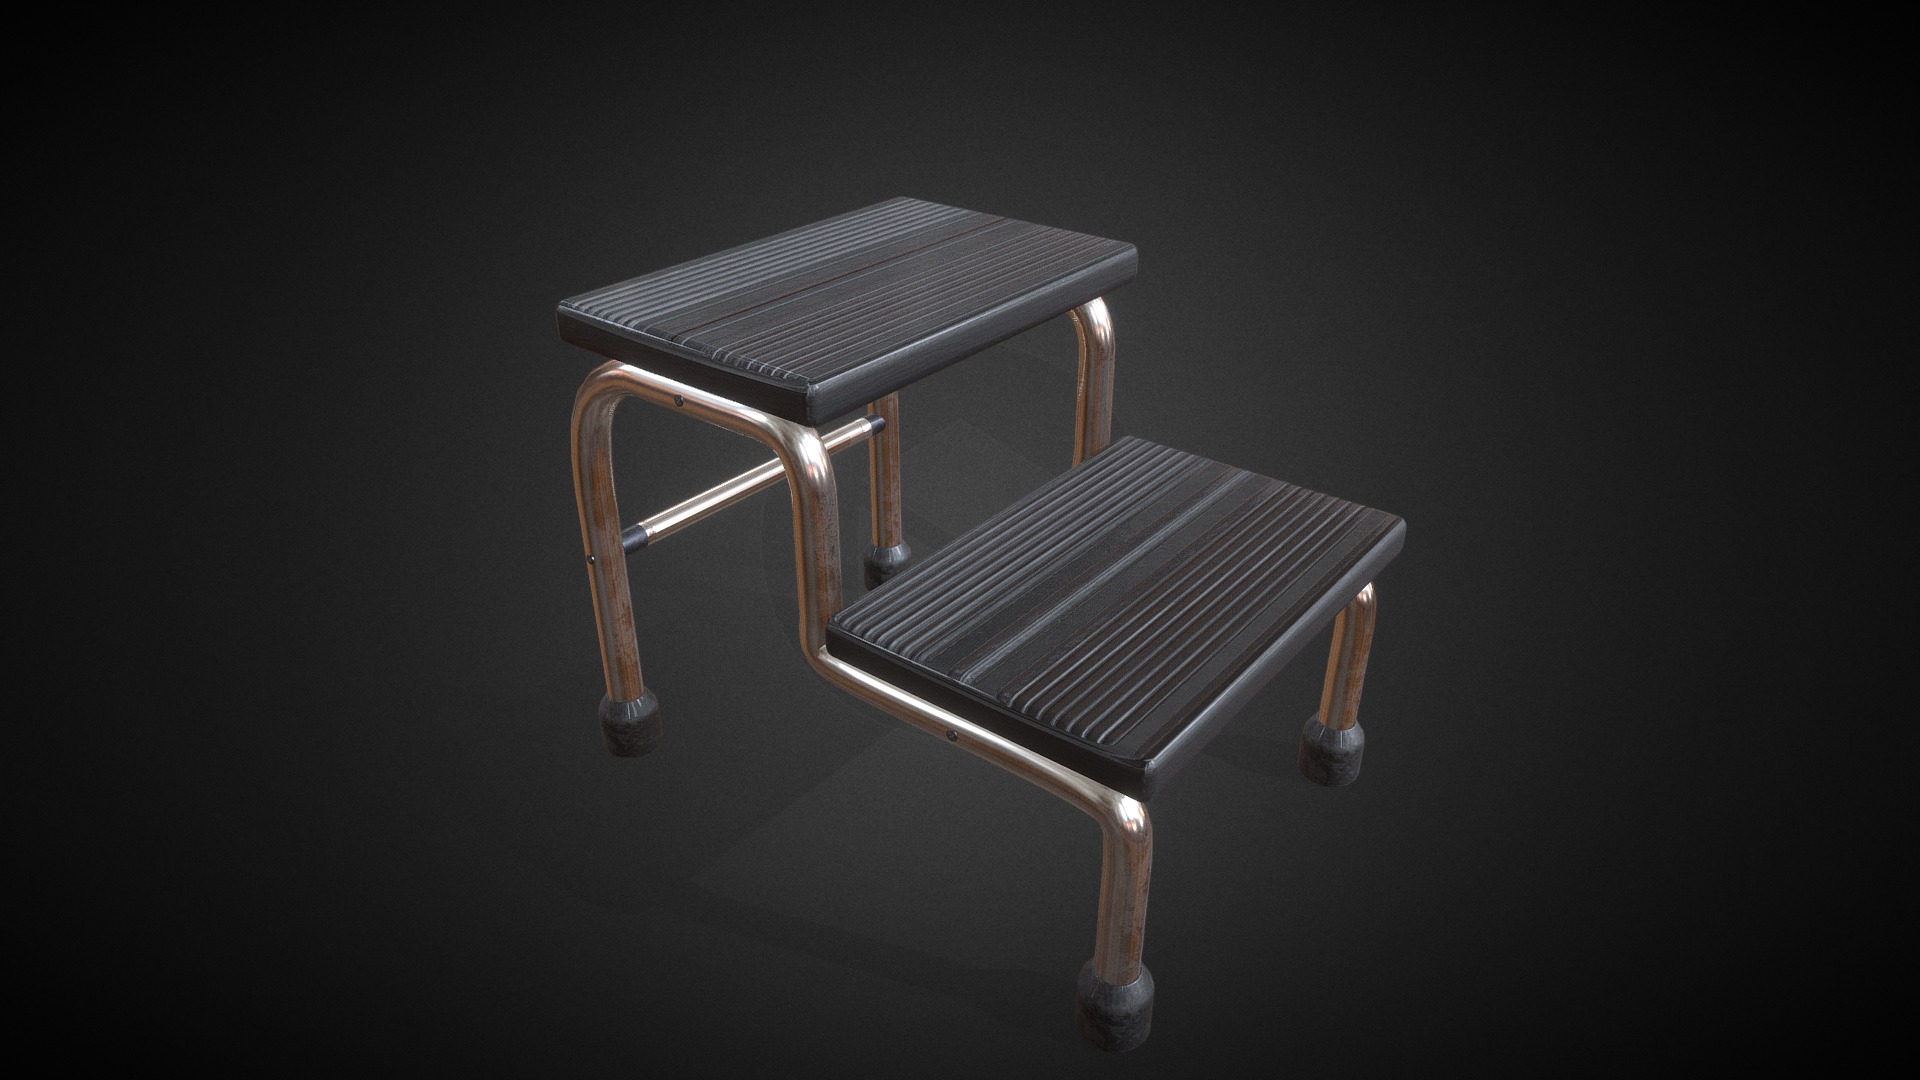 3D model Marche_pied - This is a 3D model of the Marche_pied. The 3D model is about a chair with a table.